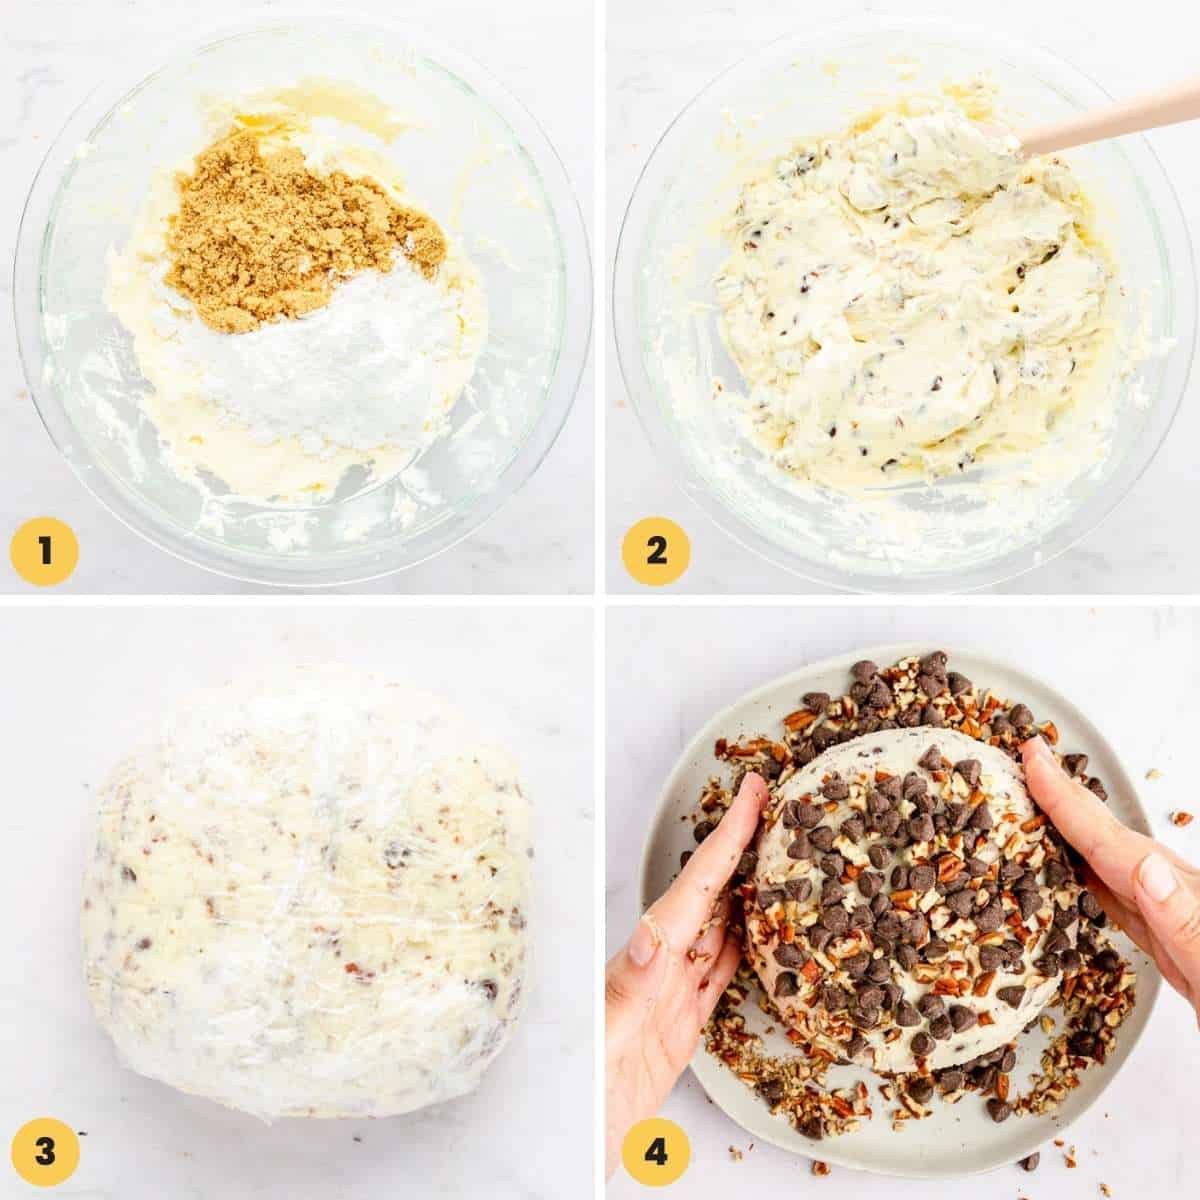 A collage of images showing how to make a chocolate chip cheese ball dessert